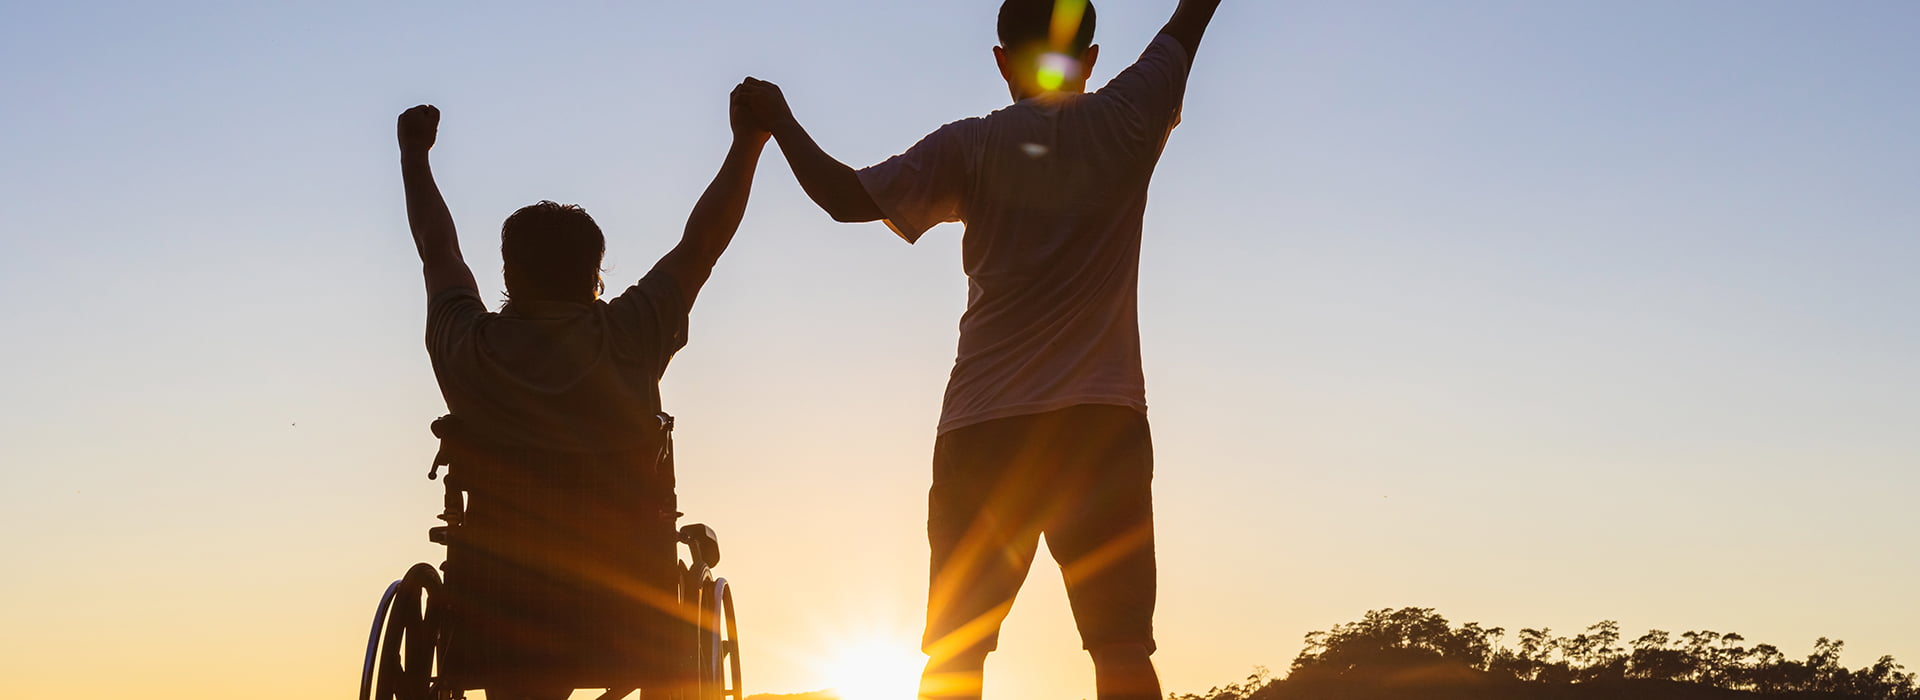 image: Silhouette of joyful disabled man in wheelchair raised hands with friend at sunset